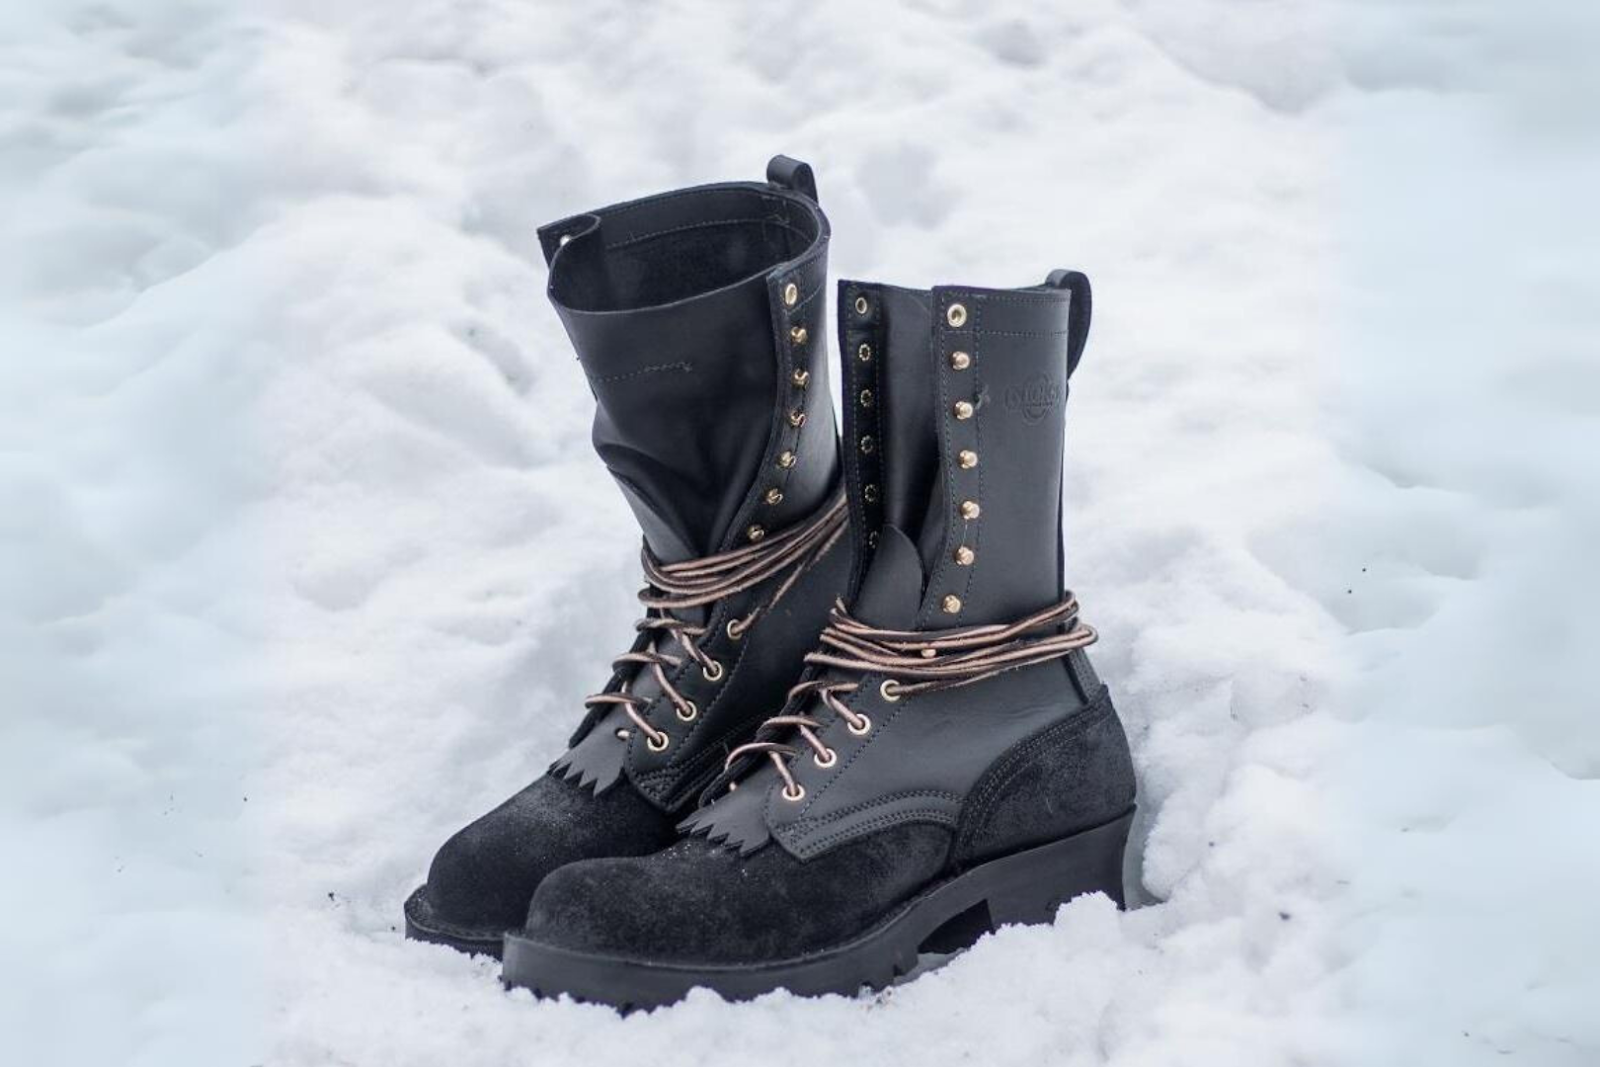 What Are The Benefits Of Snow Boots?